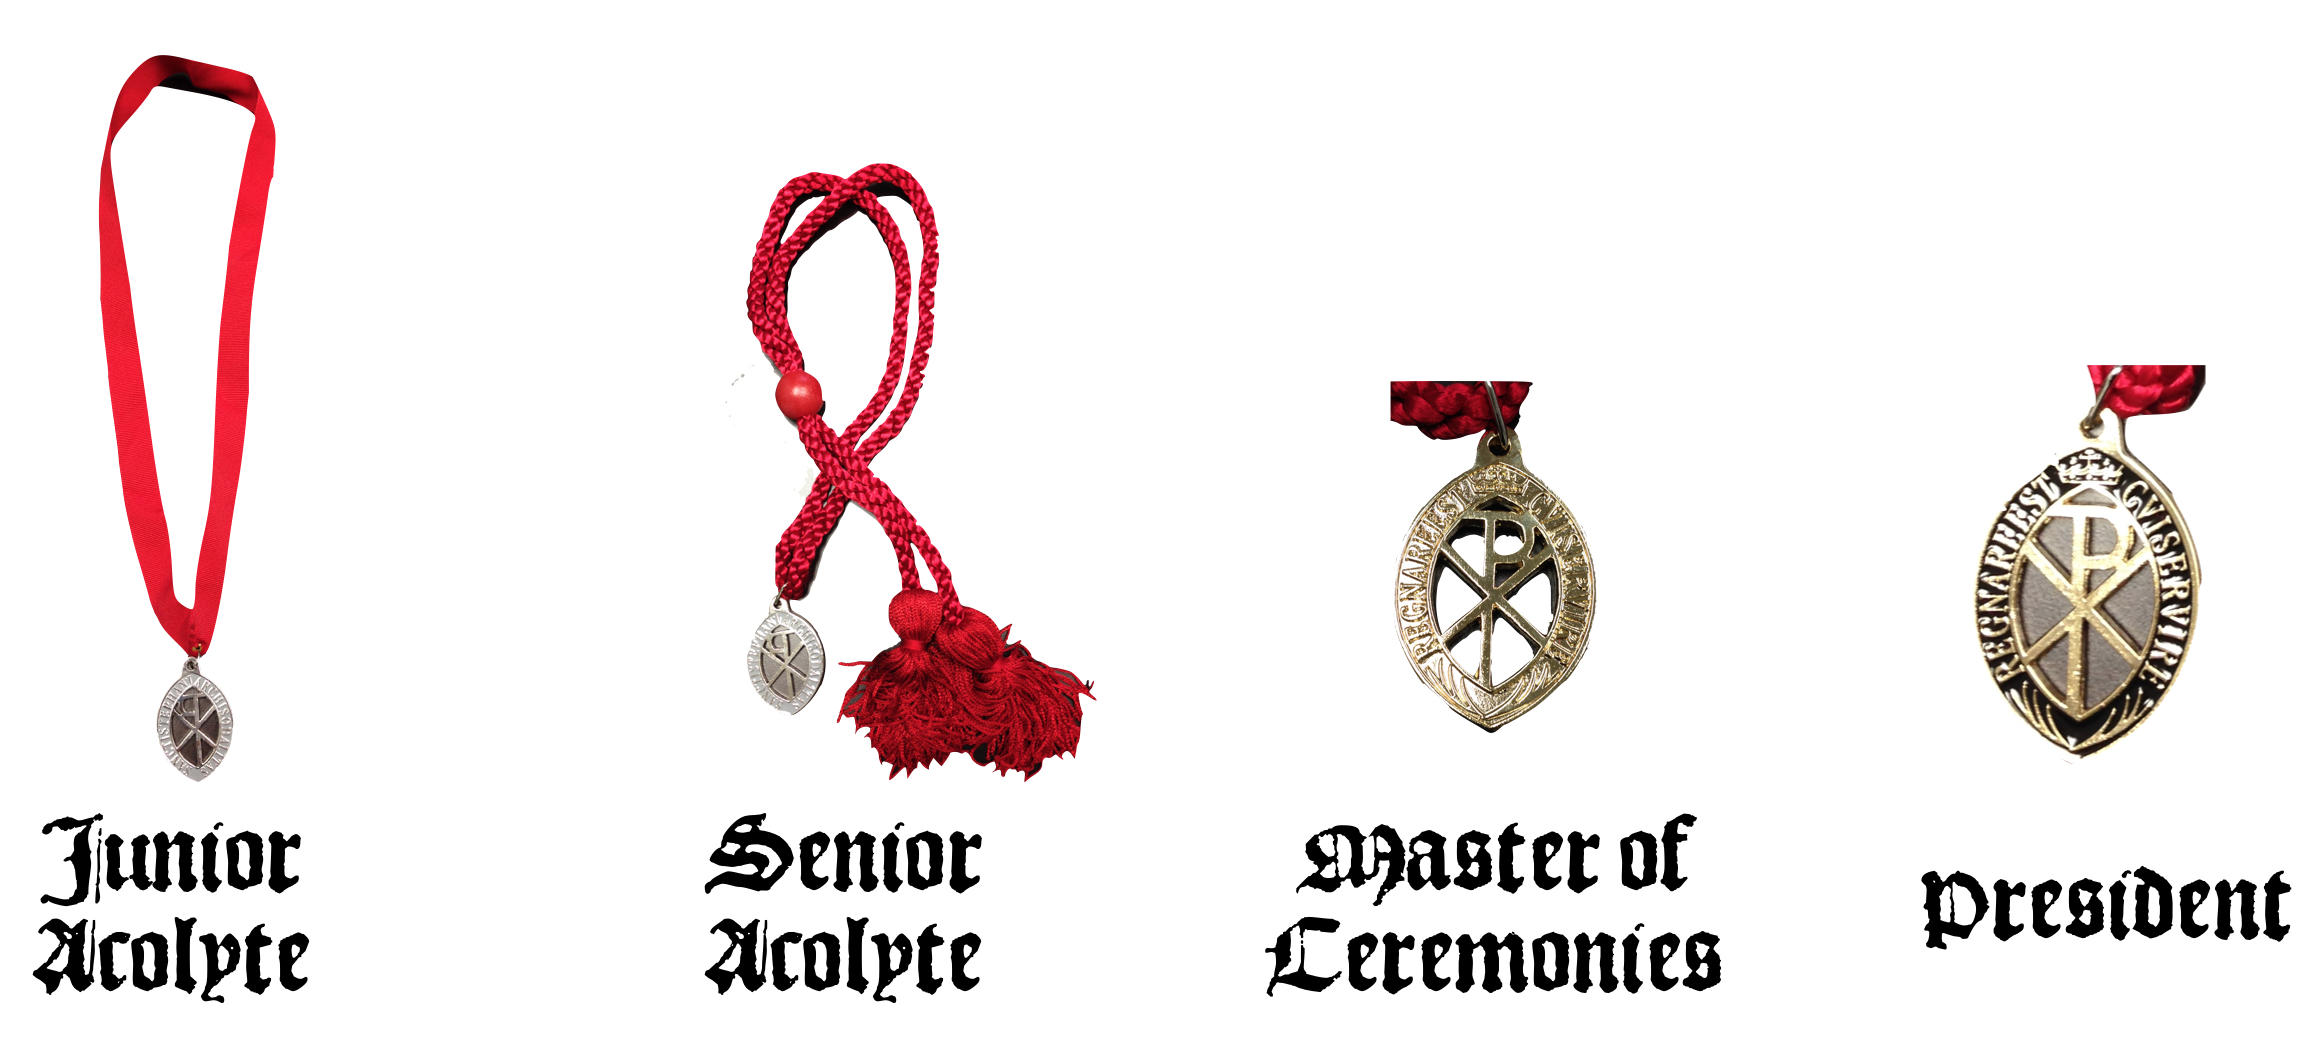 Medals of St. Stephen's Guild